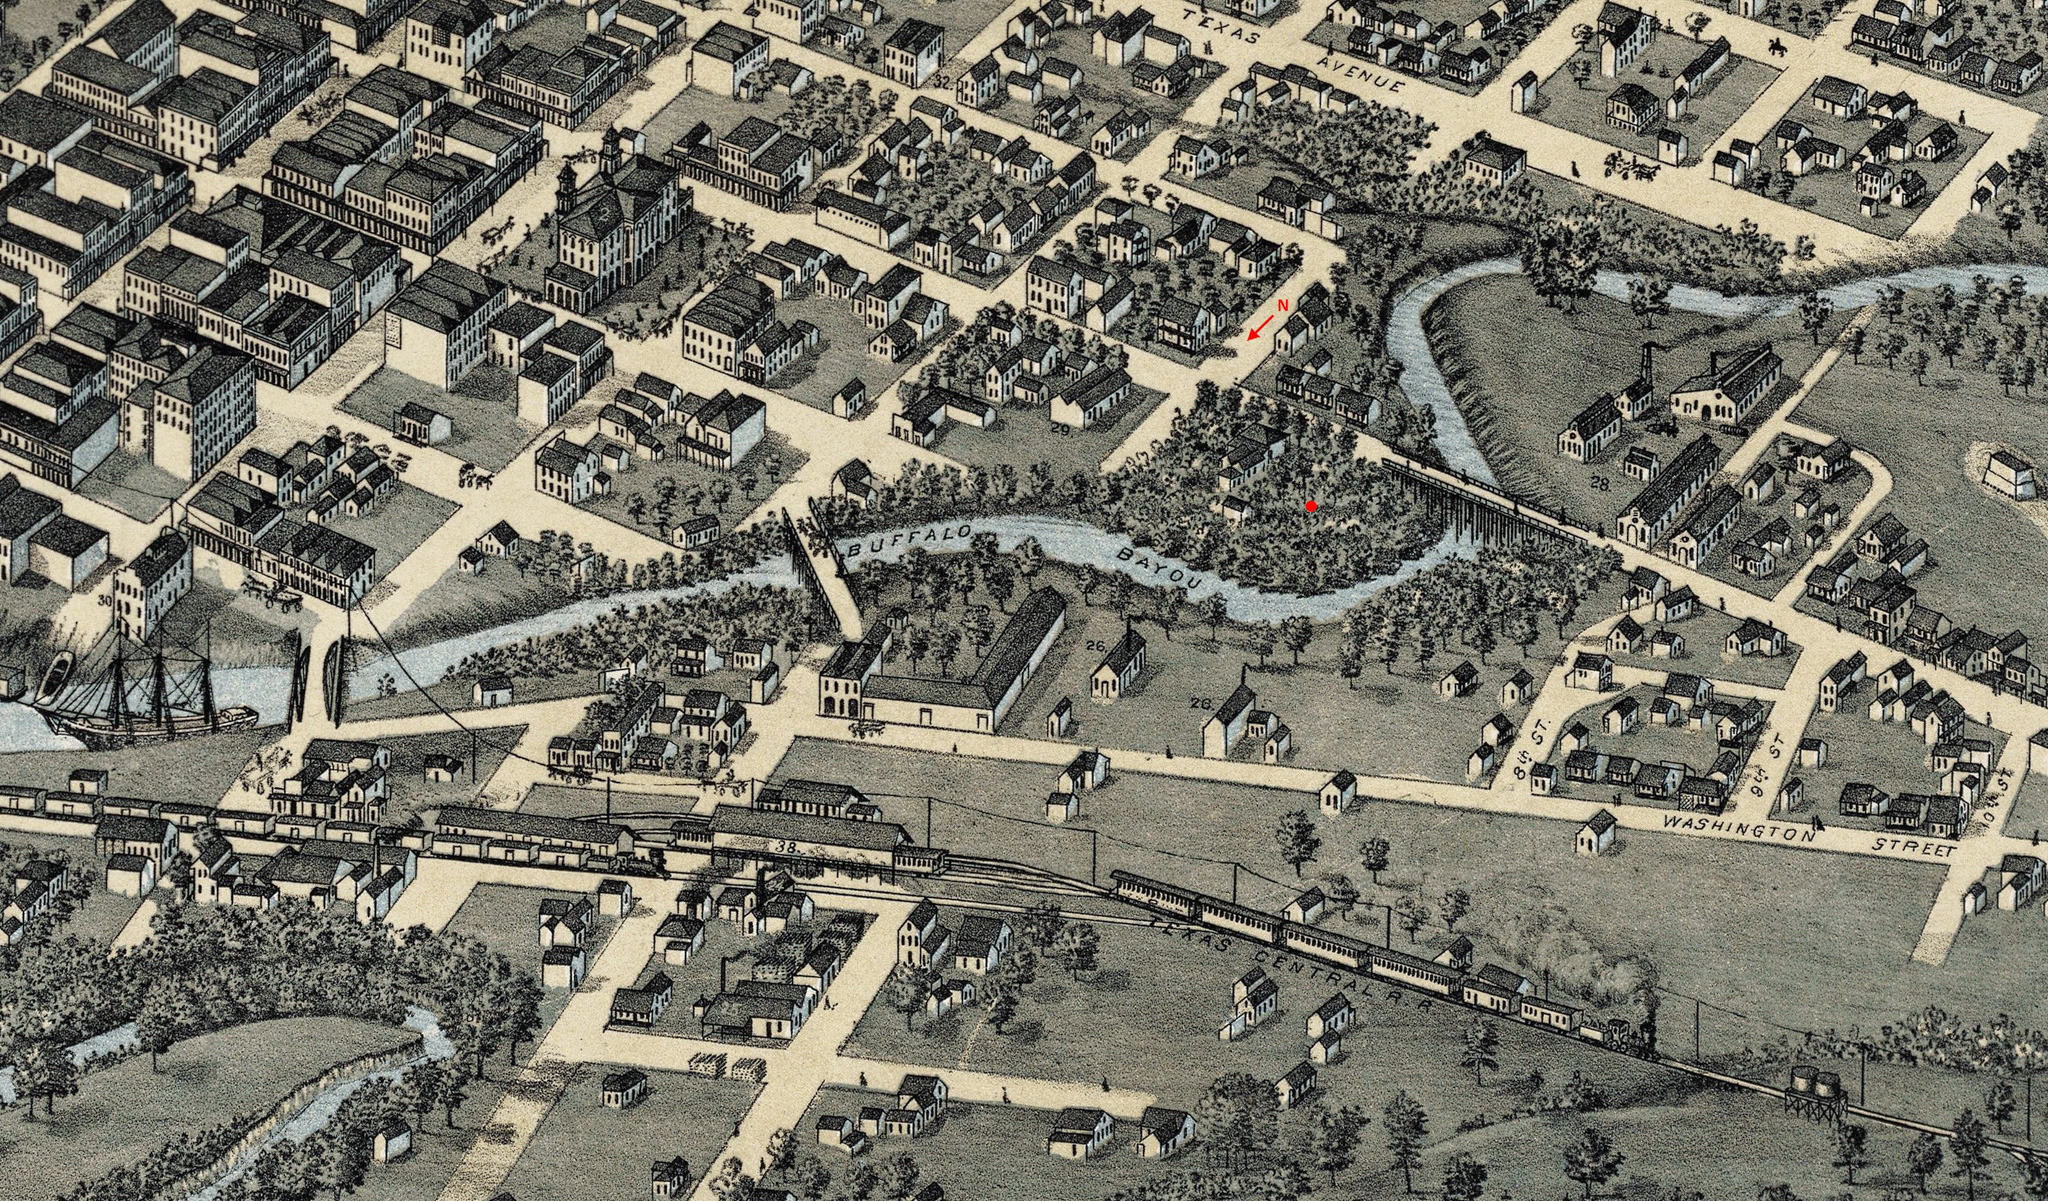 View of HD Taylor Residence on 1873 Birds-Eye Map